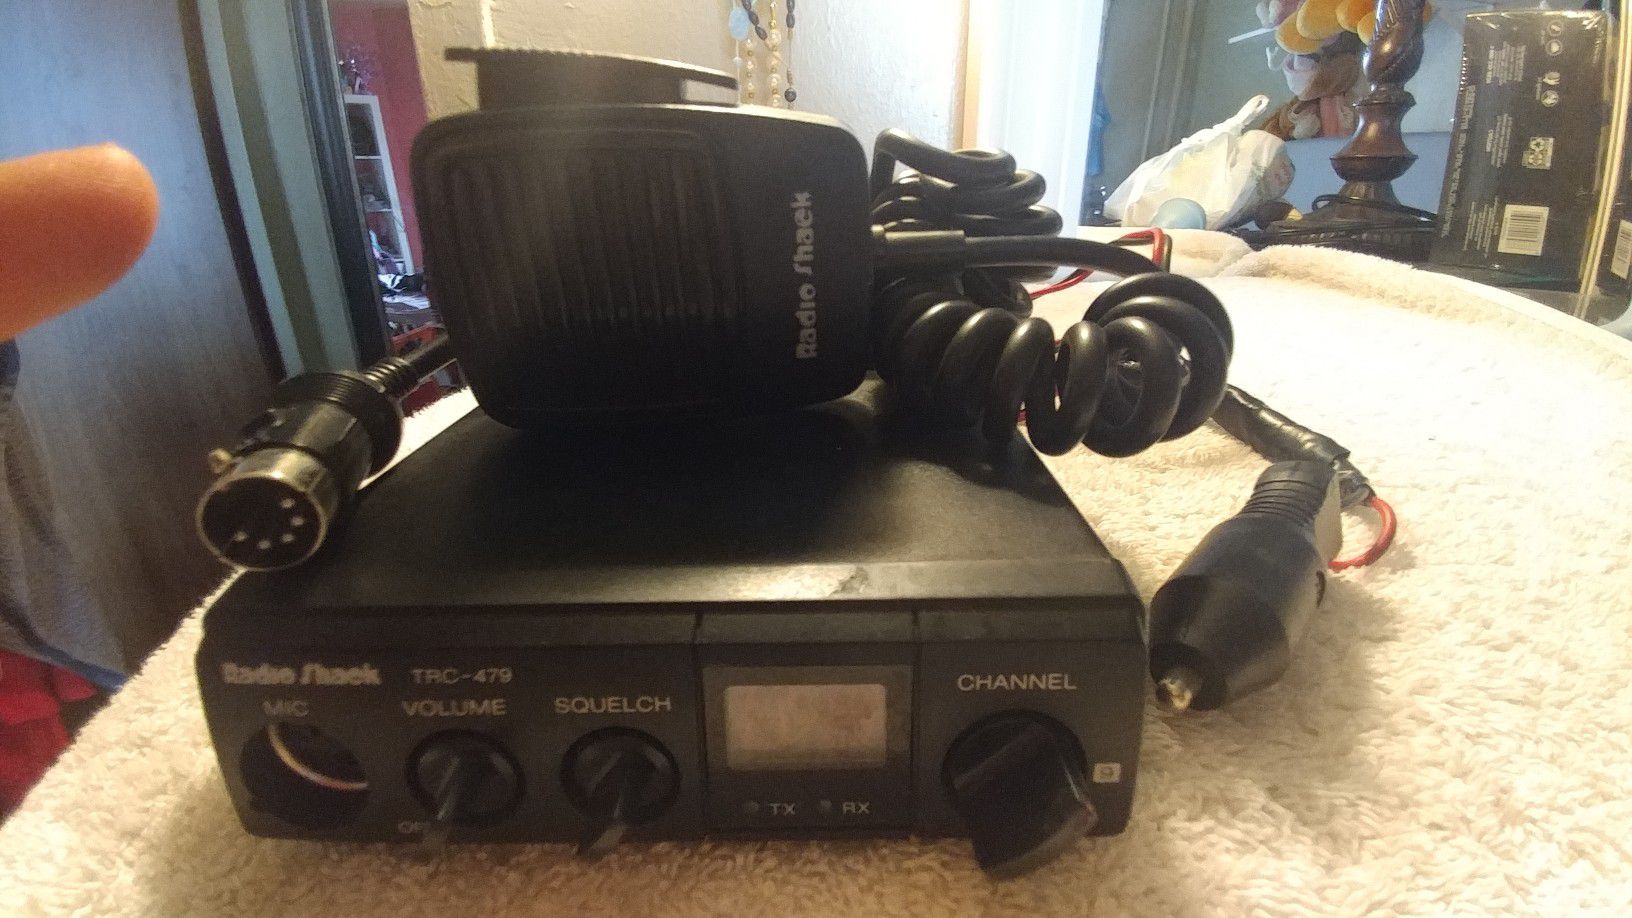 Radio shock CB Radio 40 channel ready to use in working condition